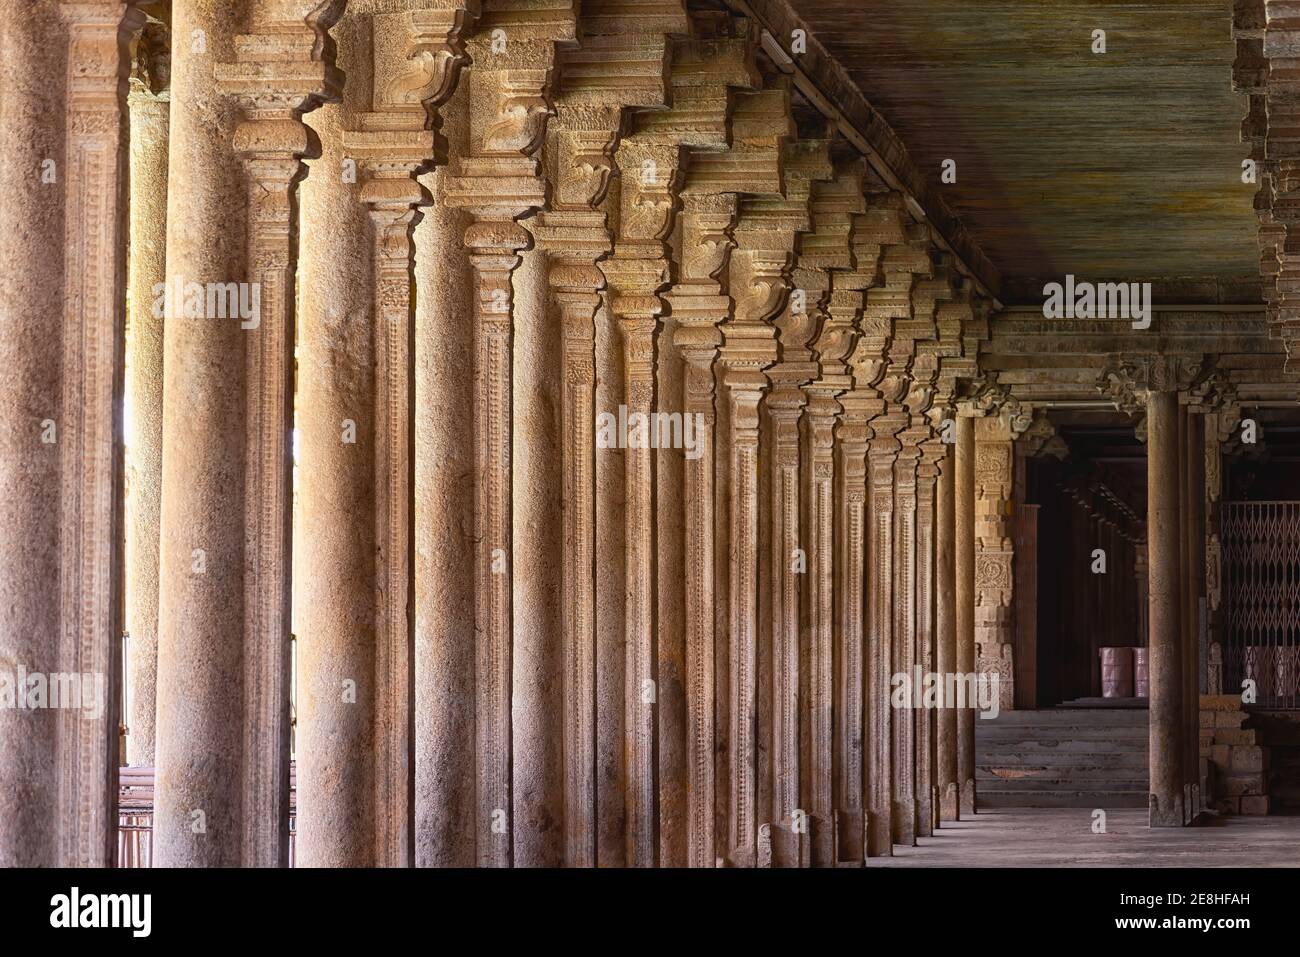 Colonnade in Sri Ranganathaswamy Temple, India. The Sri Ranganathaswamy is a Hindu temple constructed in the Dravidian architectural style Stock Photo